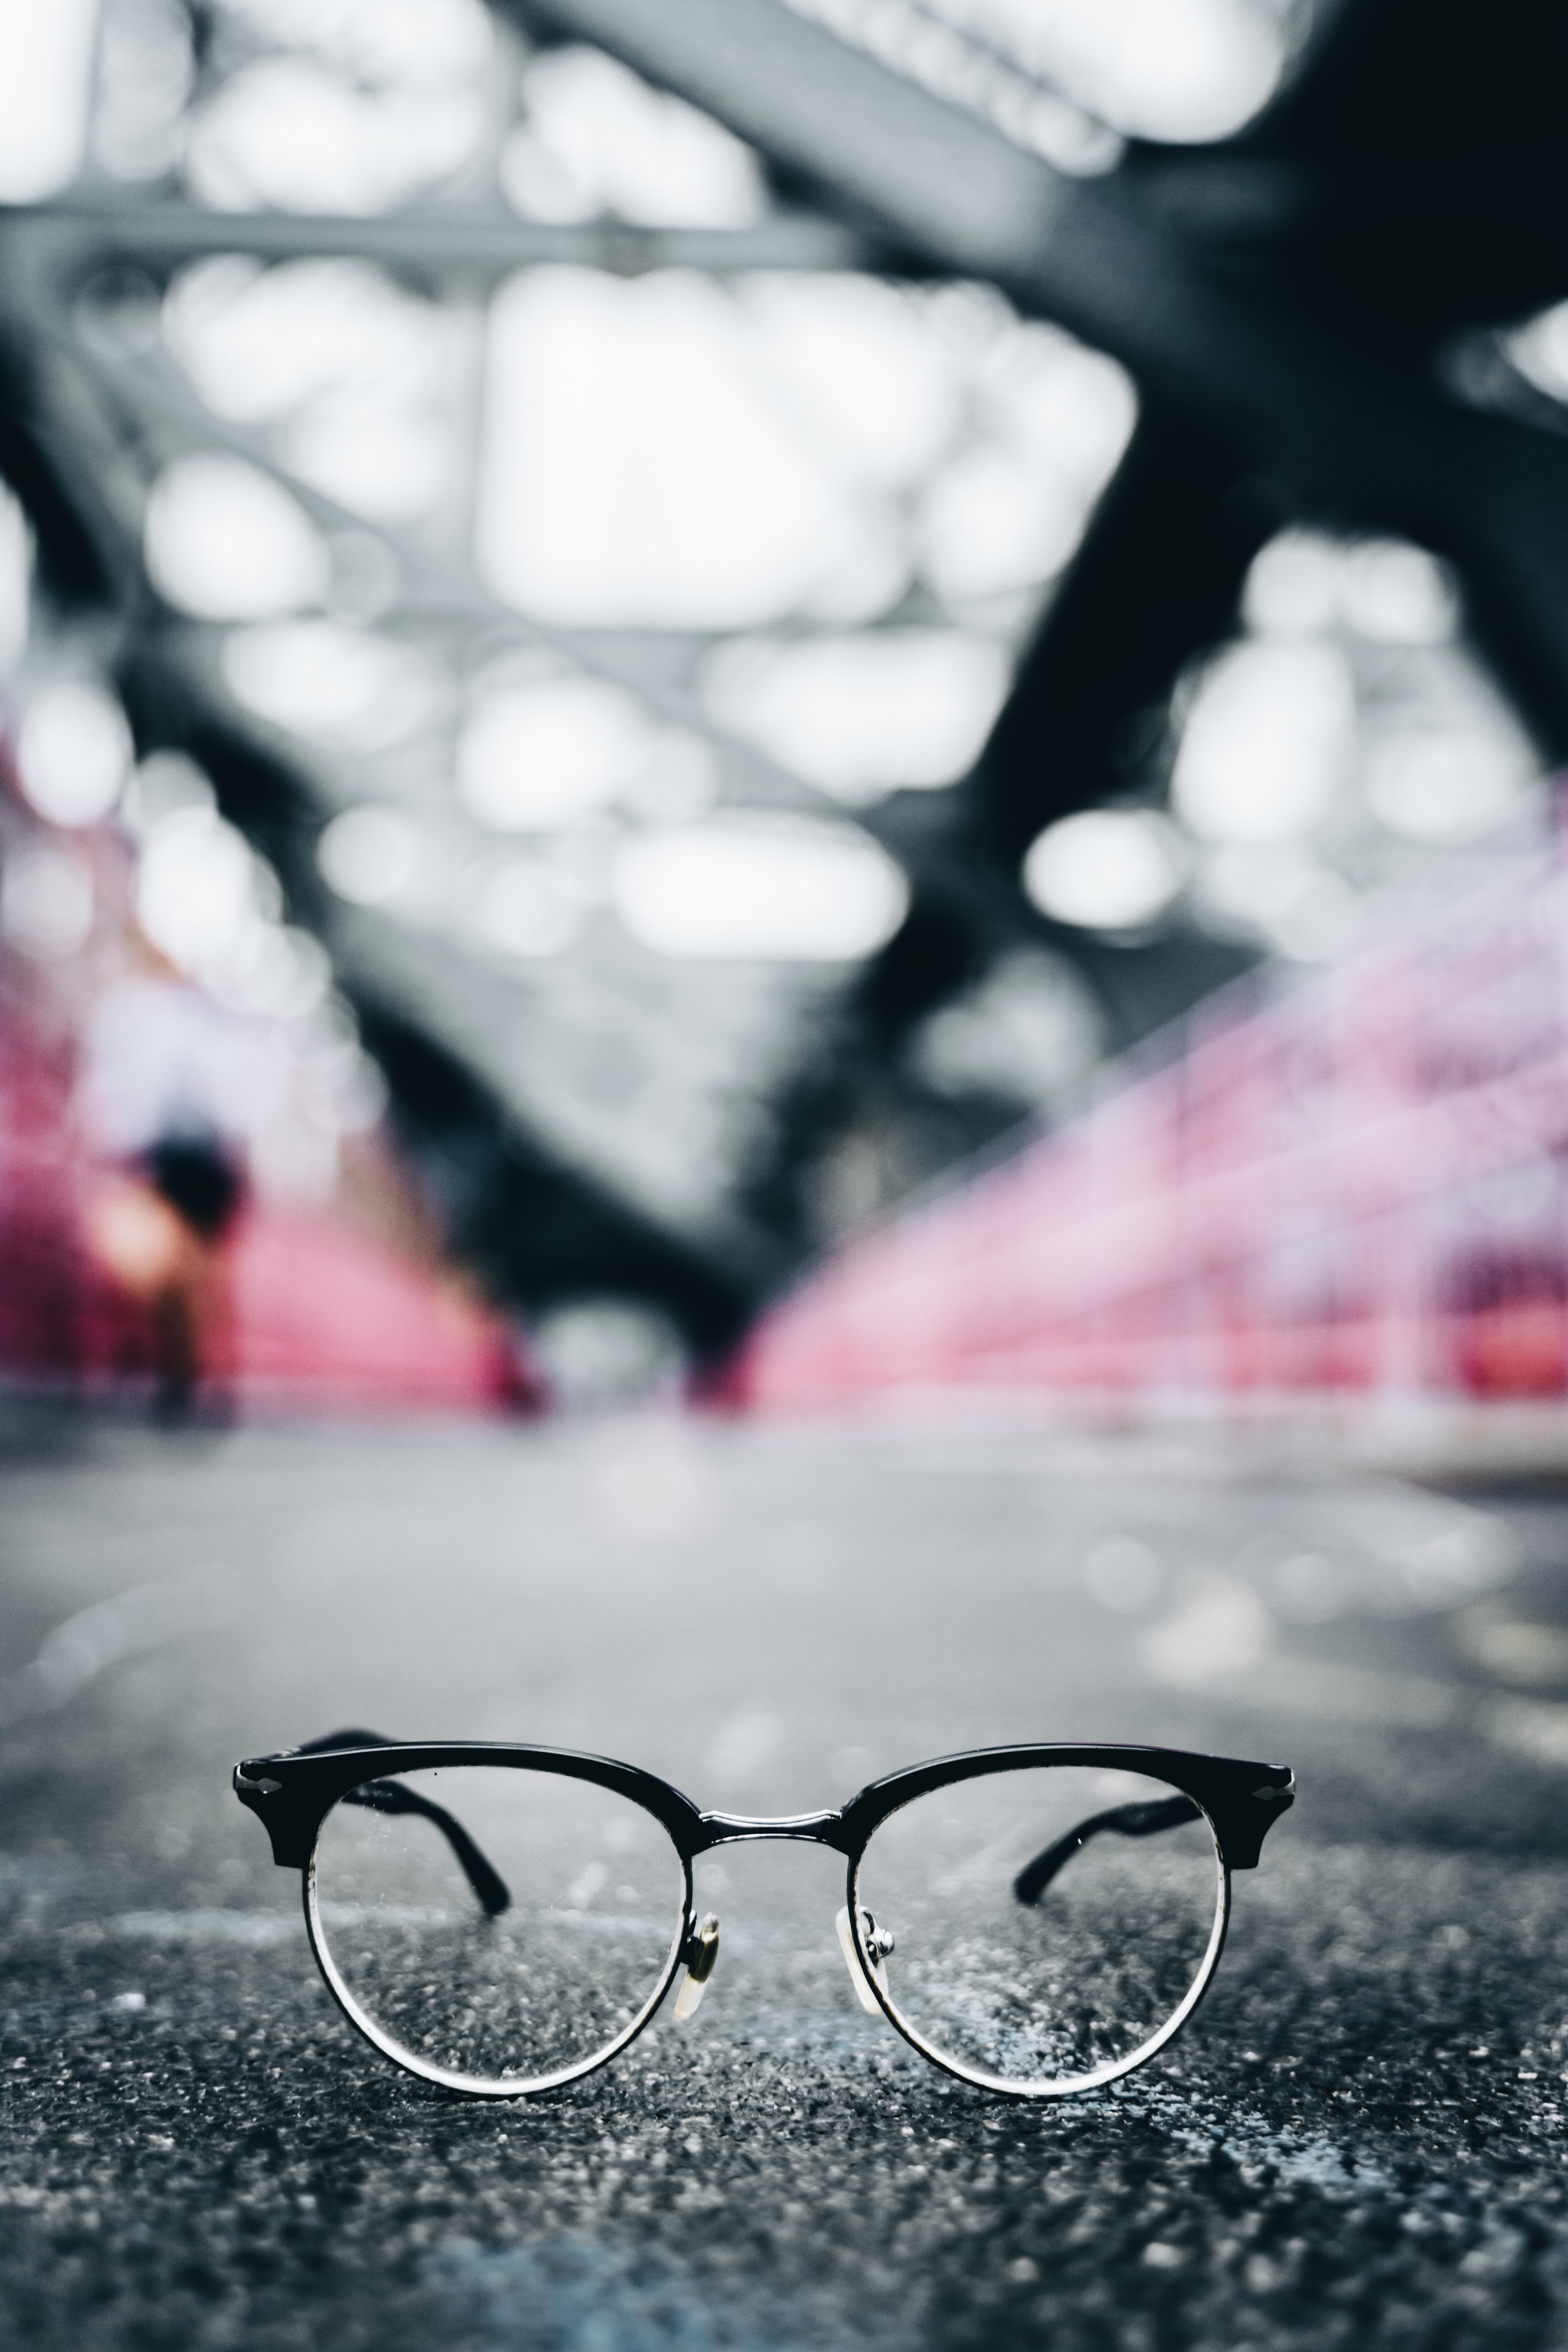 Spectacles Vertical Background